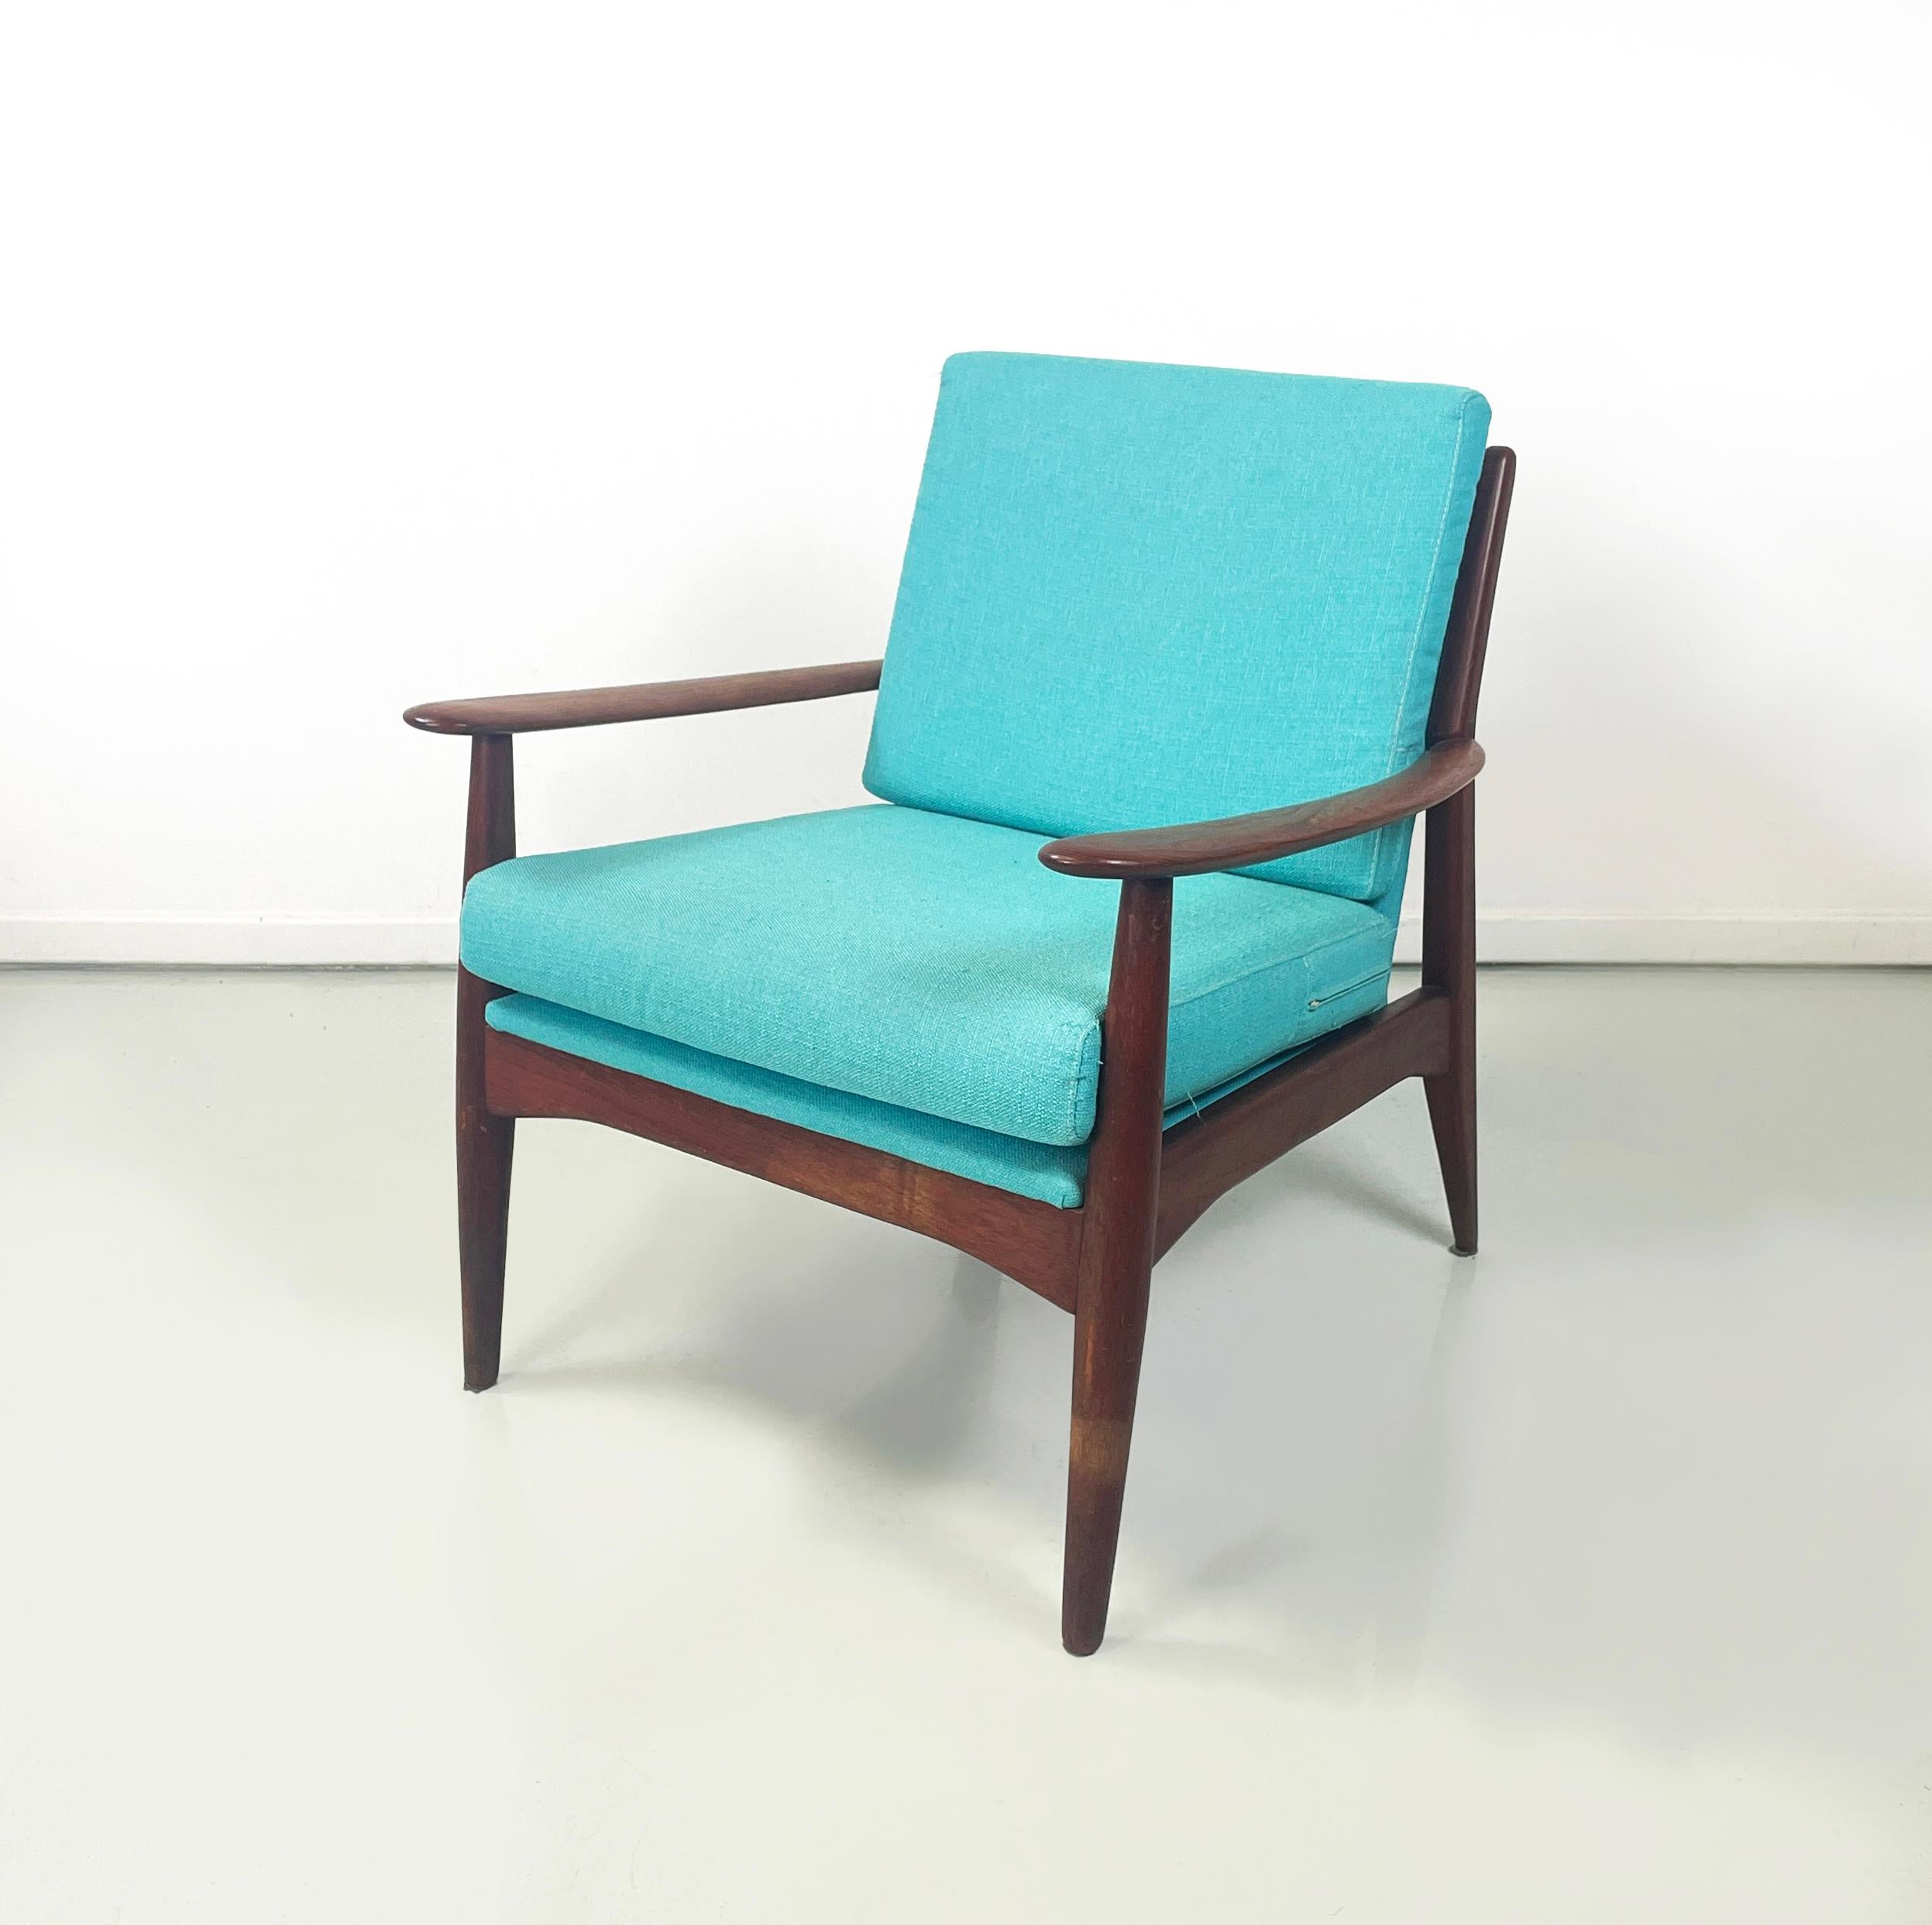 European mid-century modern Armchairs in light blue fabric and wood, 1960s
Pair of armchairs with squared seat and back, padded and covered in Tiffany light and bright blue fabric. The solid wood structure has beveled edges and soft silhouette, with